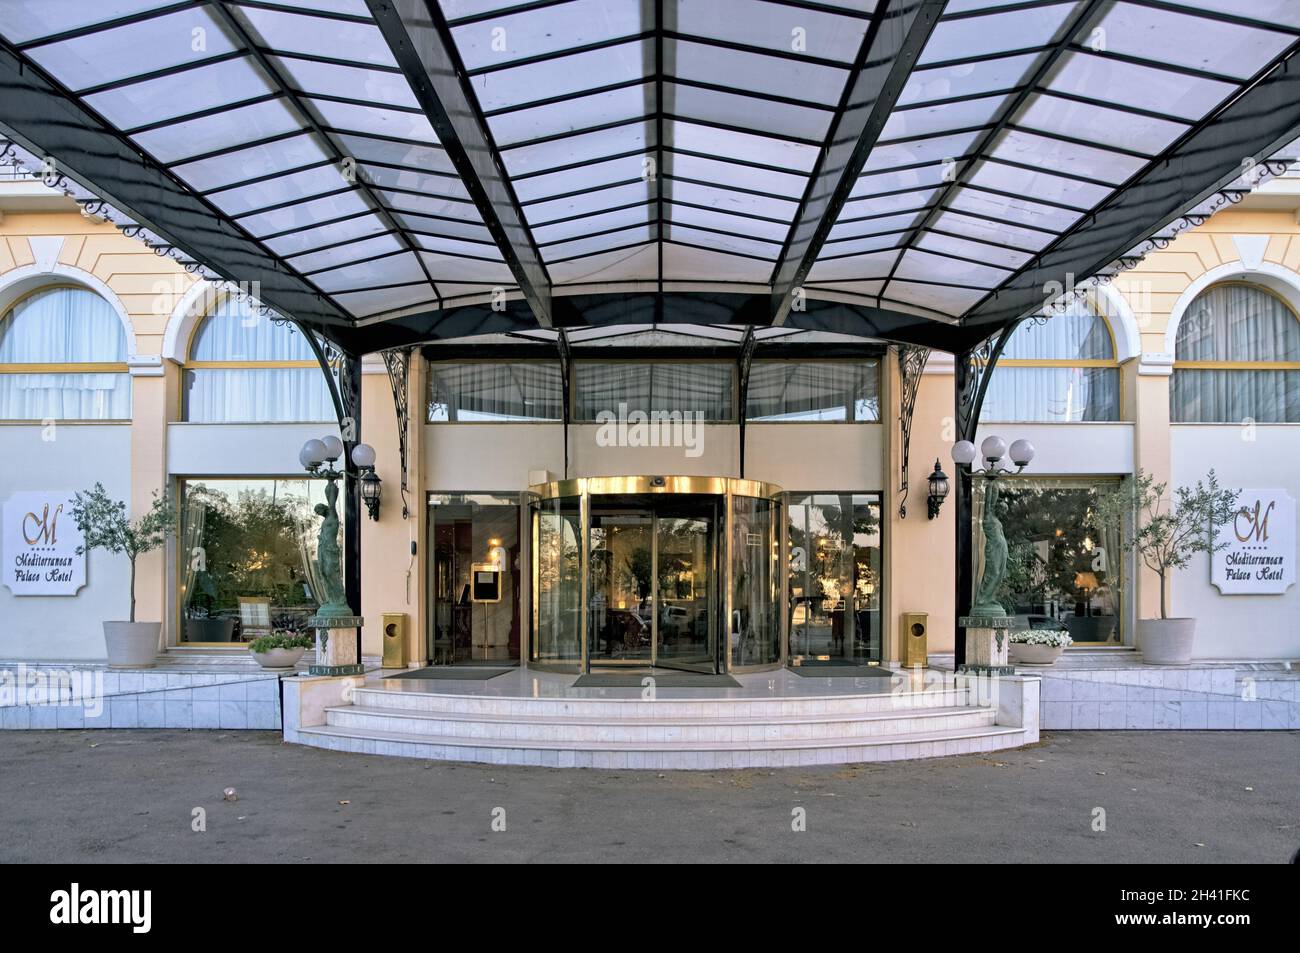 economy of tourism in Greece entrance of a luxury hotel in the town of Thessaloniki Stock Photo